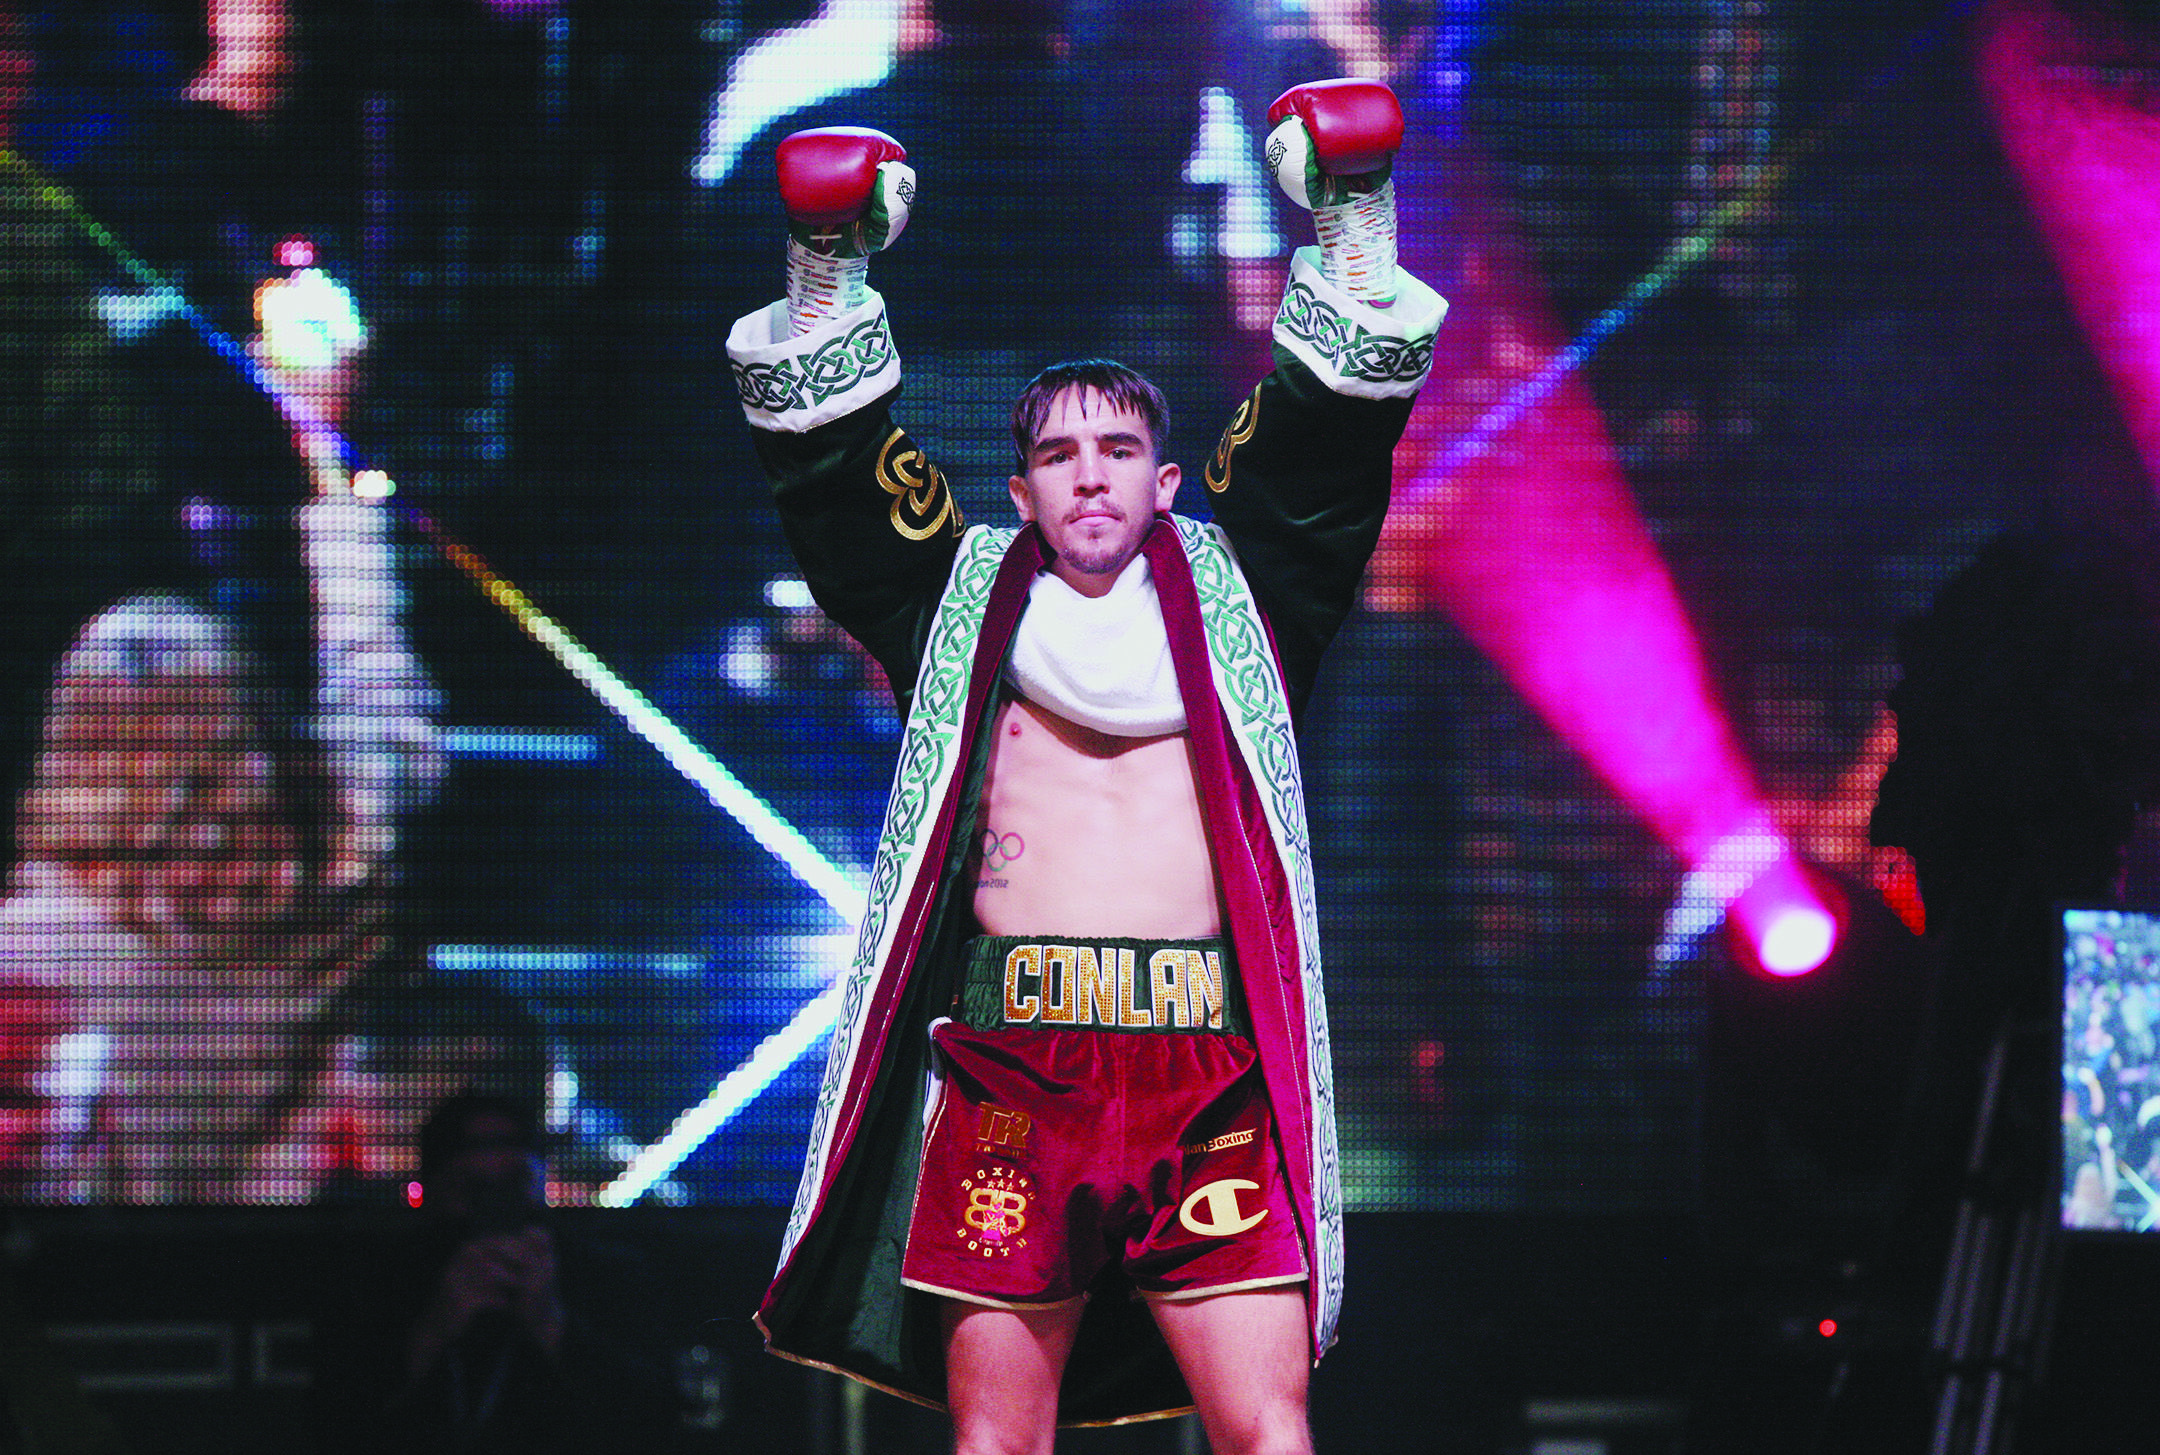 Michael Conlan will challenge WBA featherweight champion Leigh Wood in Nottingham on March 12